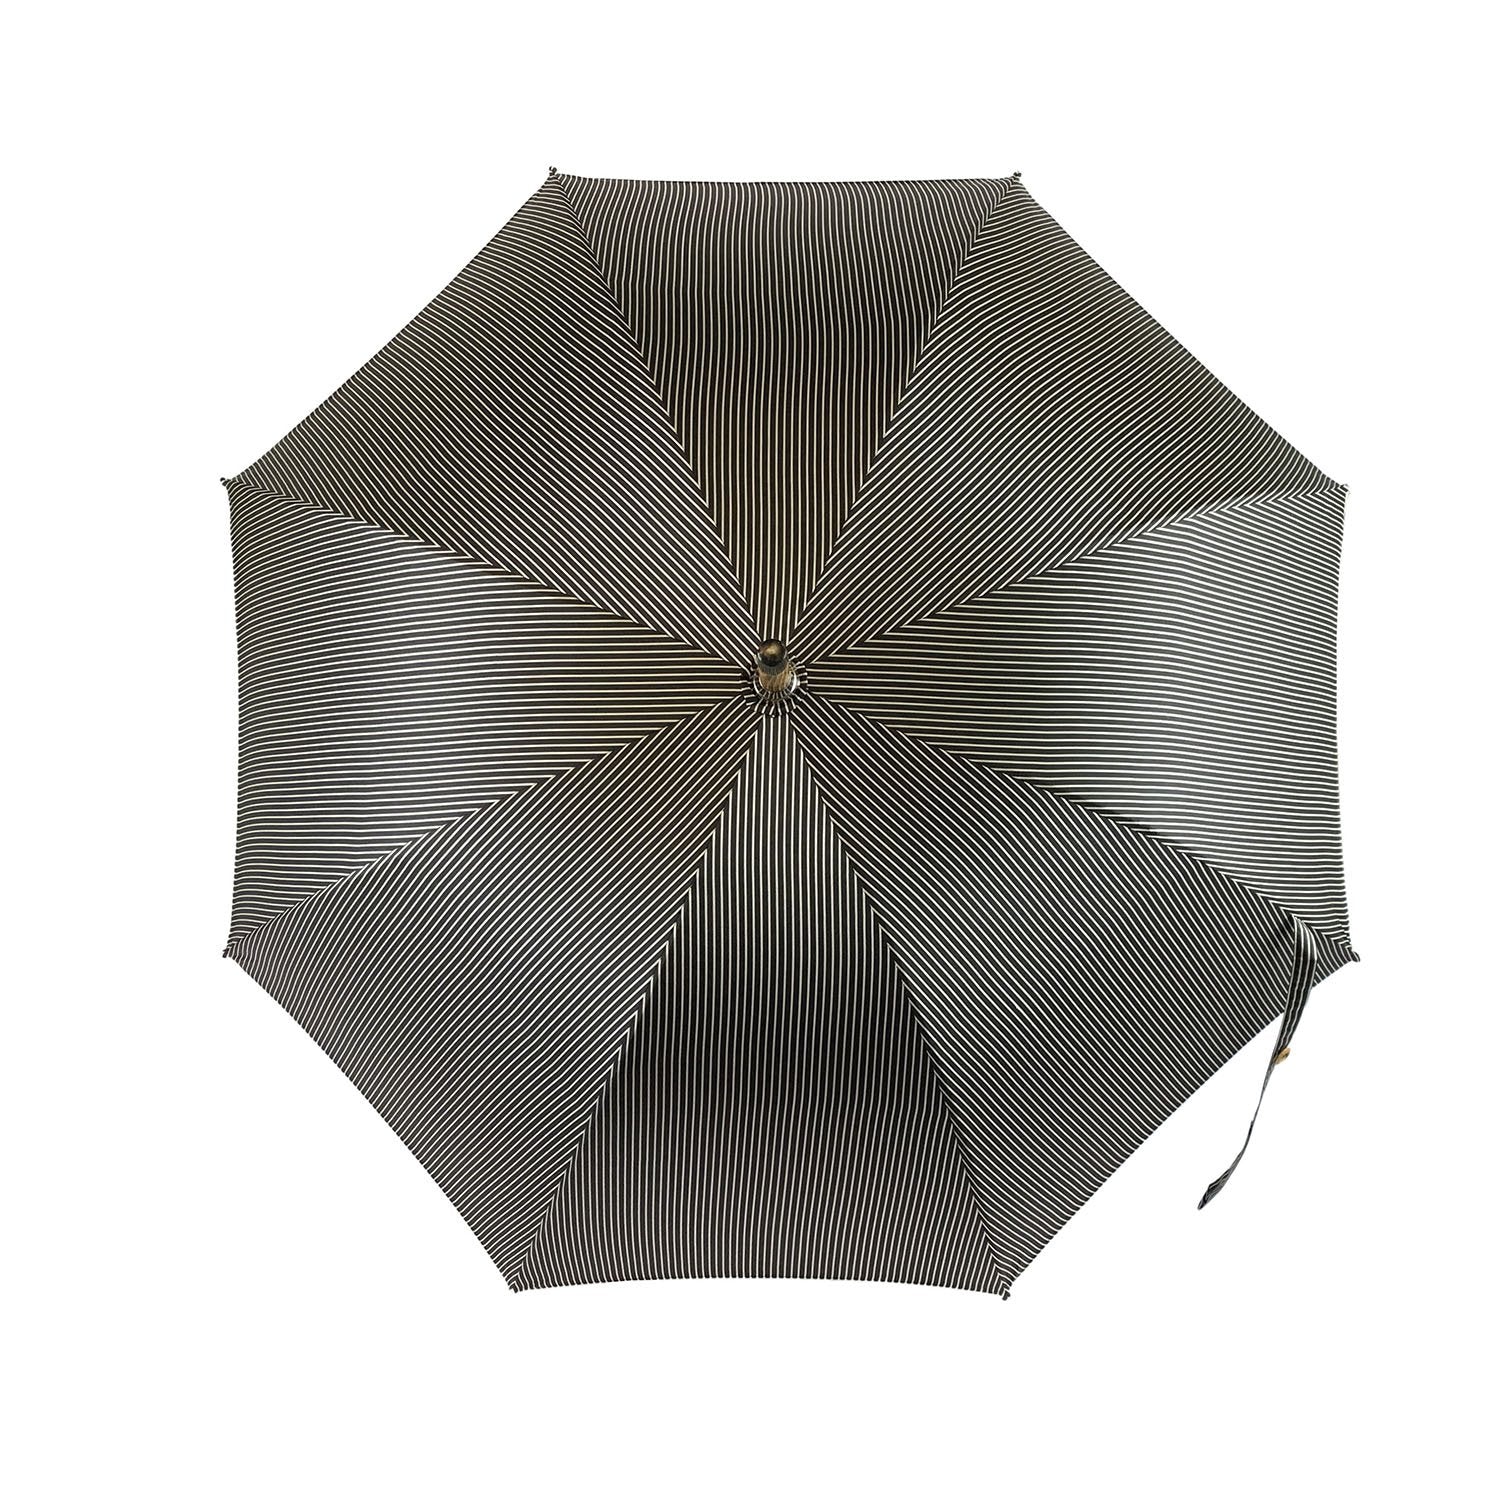 Black&White umbrella with Malacca Wood hand-curved - IL MARCHESATO LUXURY UMBRELLAS, CANES AND SHOEHORNS